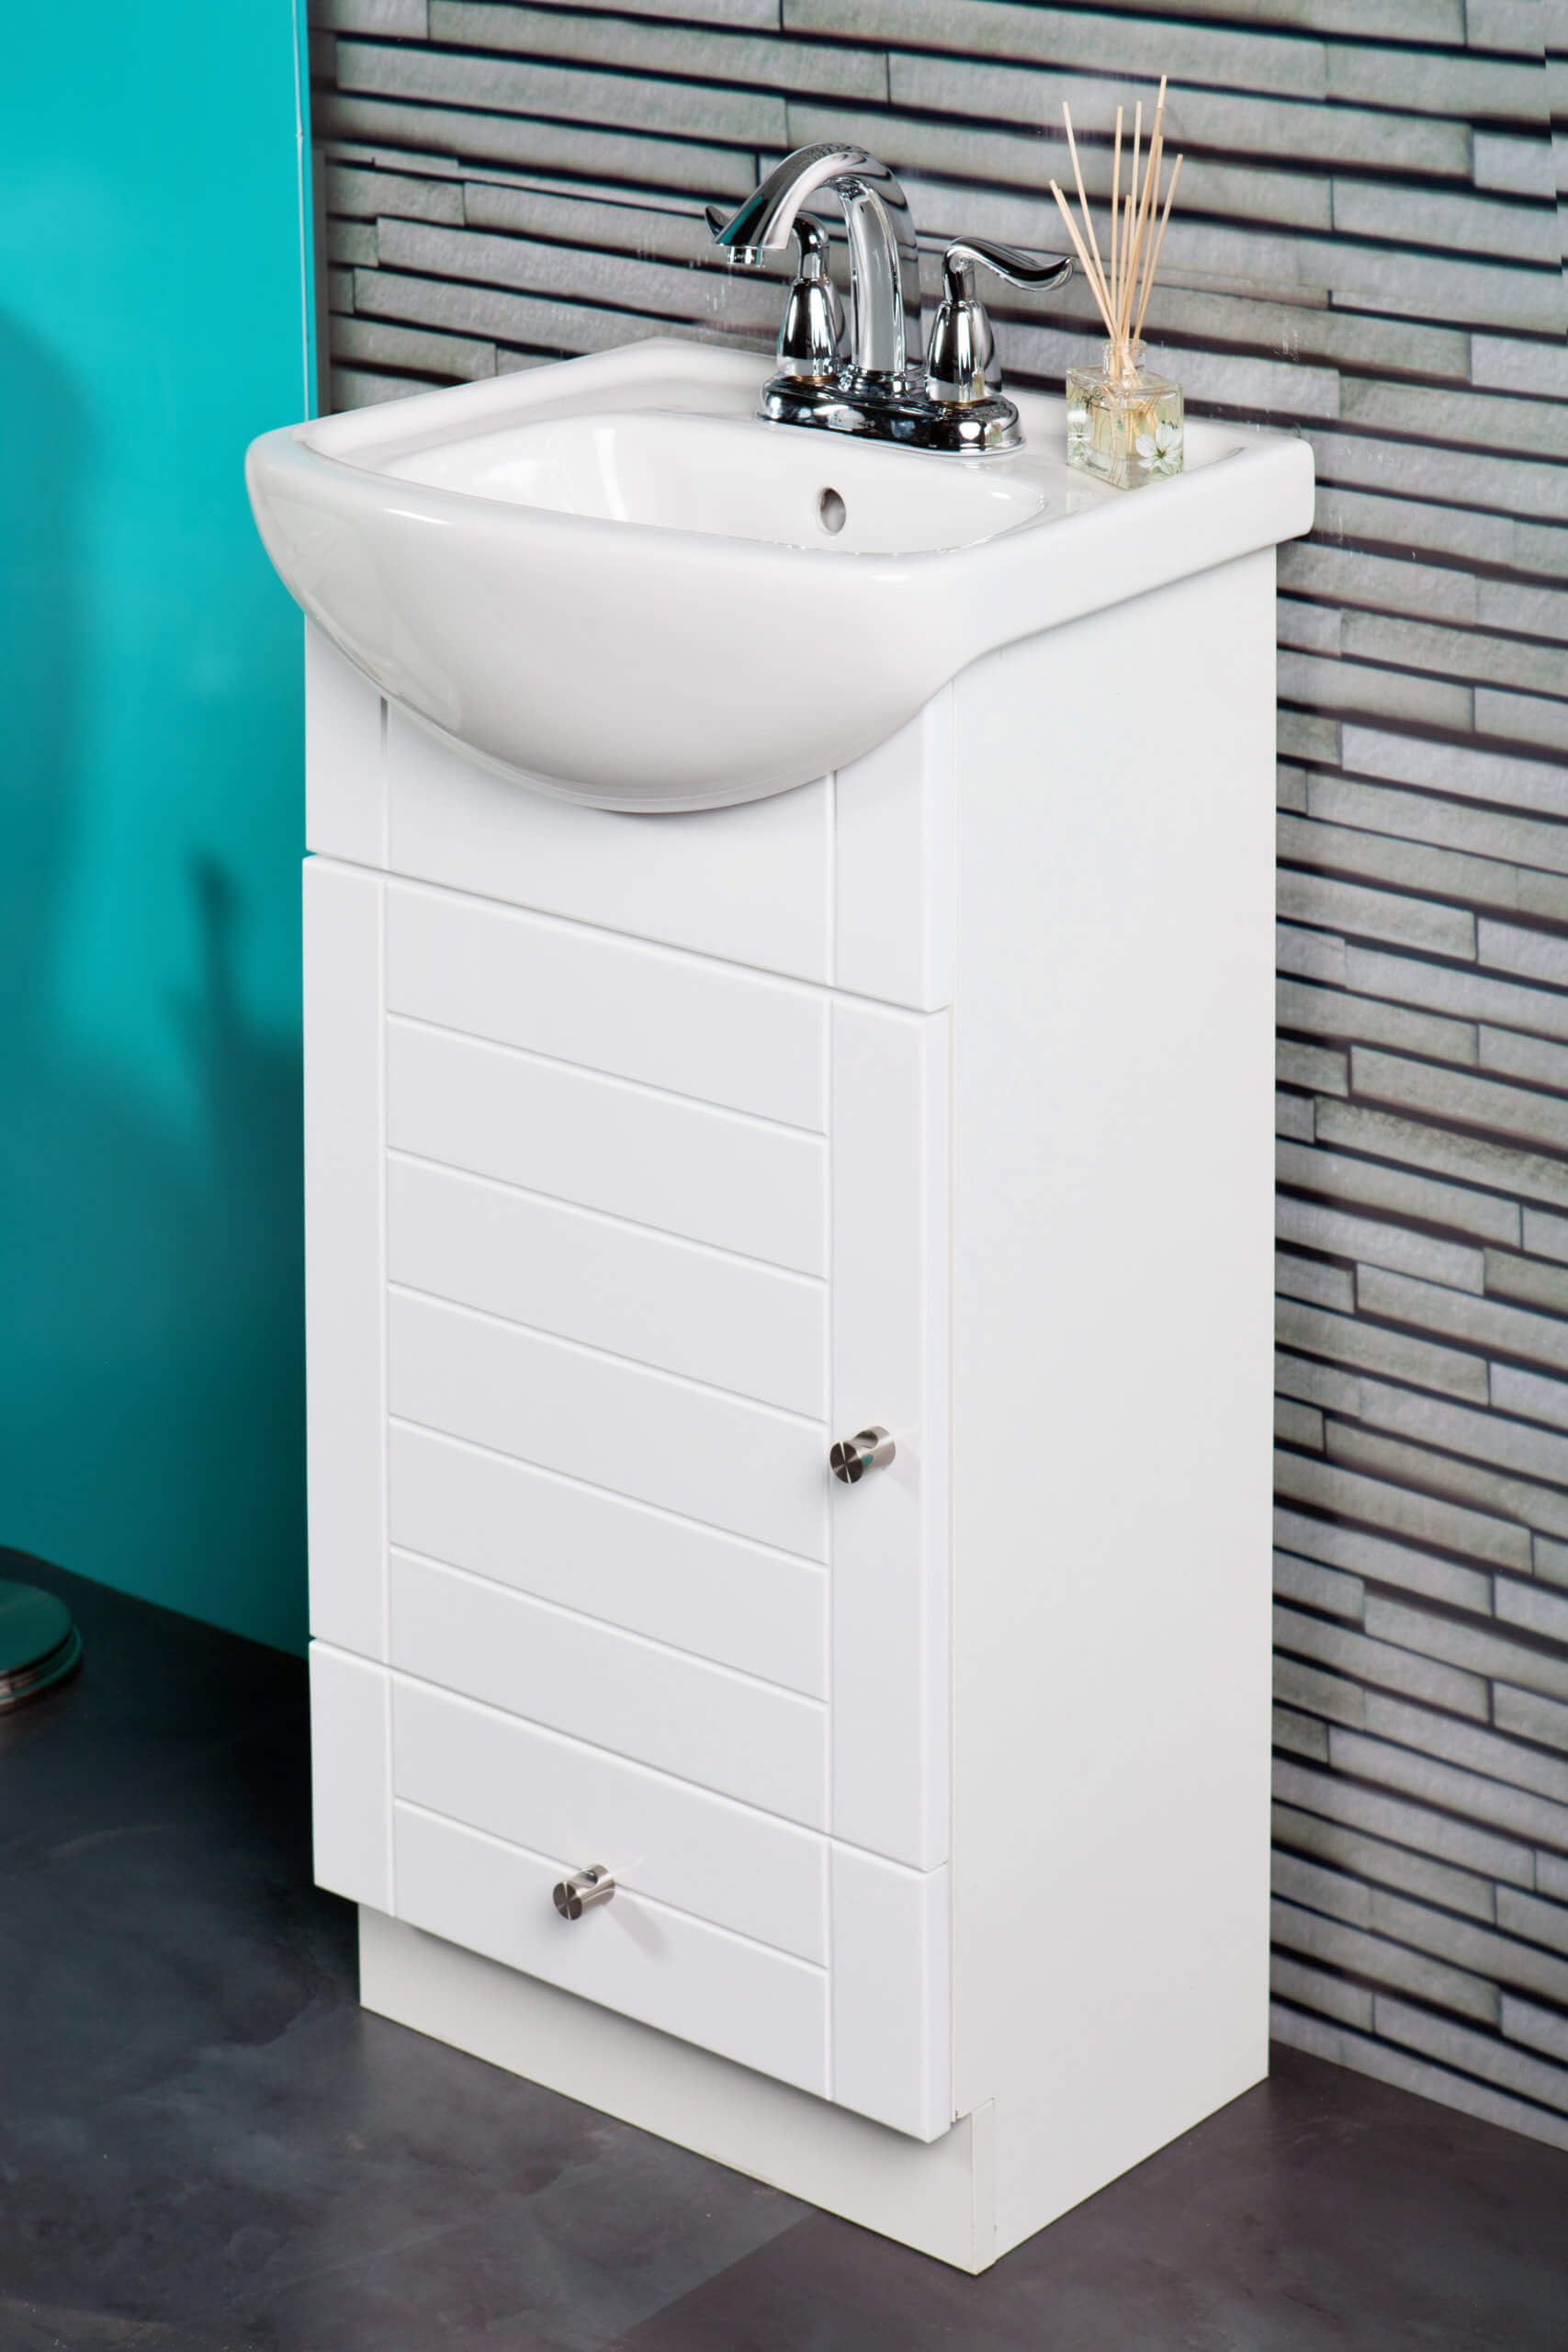 Small Bathroom Sink Cabinets Cost - Best Design Idea